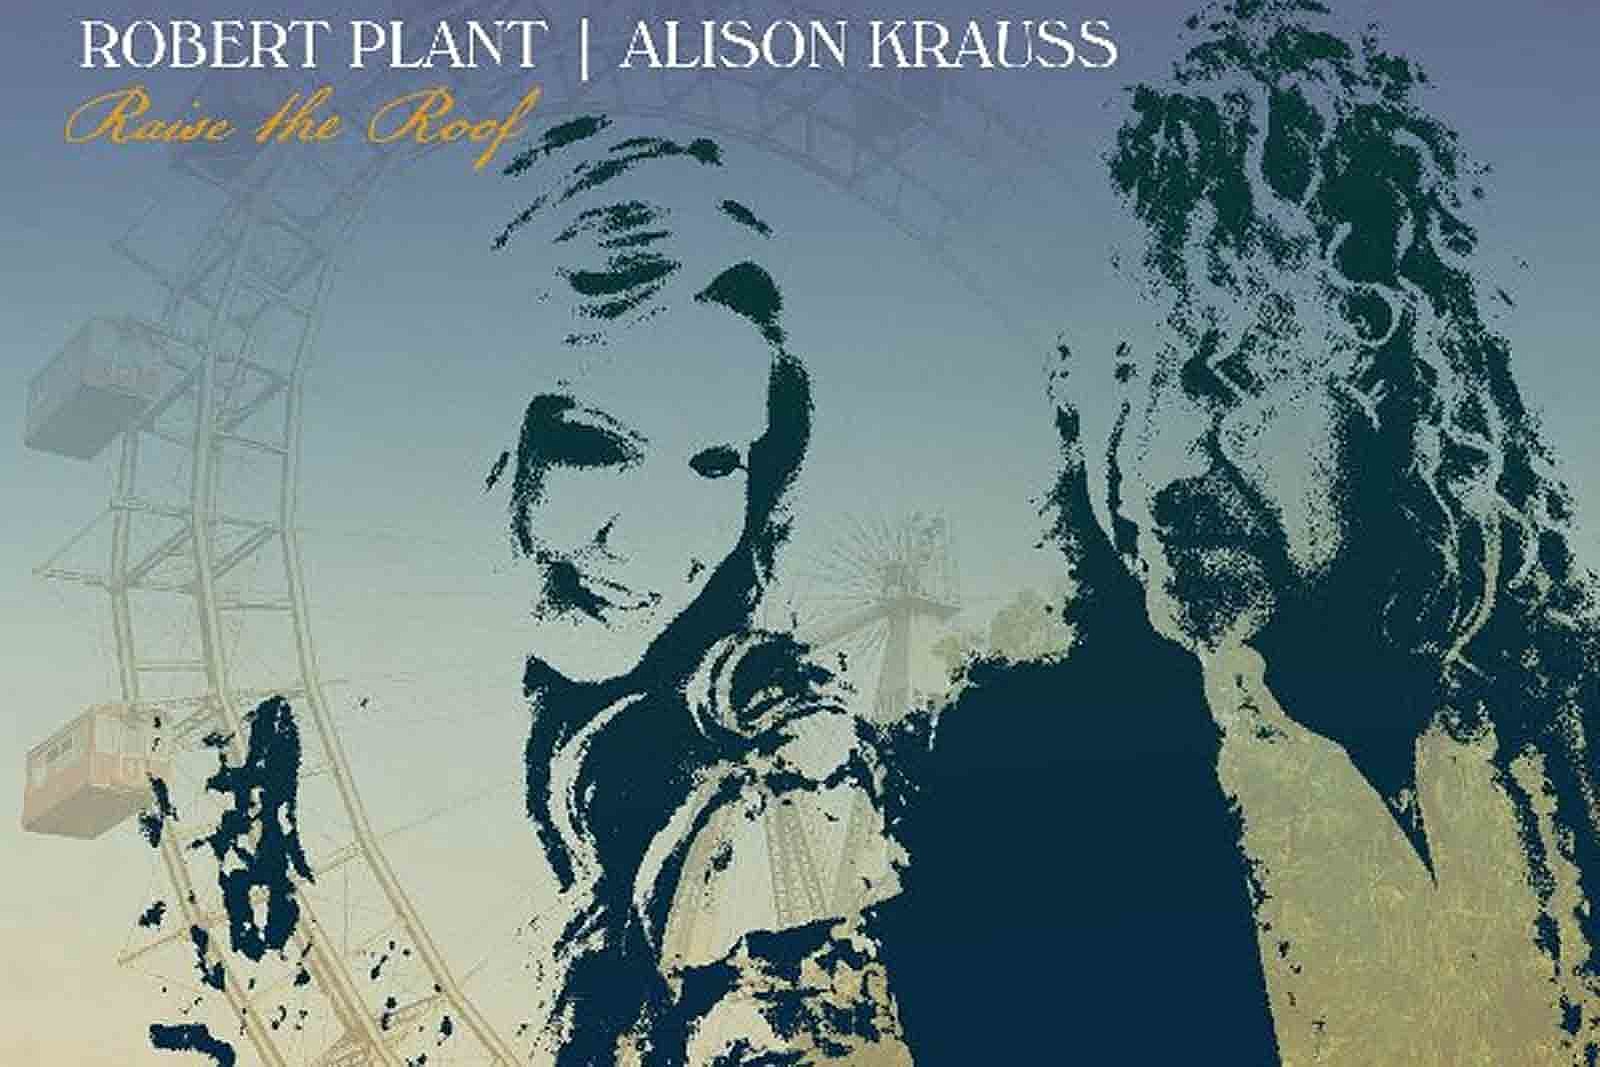 Robert Plant and Alison Krauss, ‘Raise the Roof’: Album Review